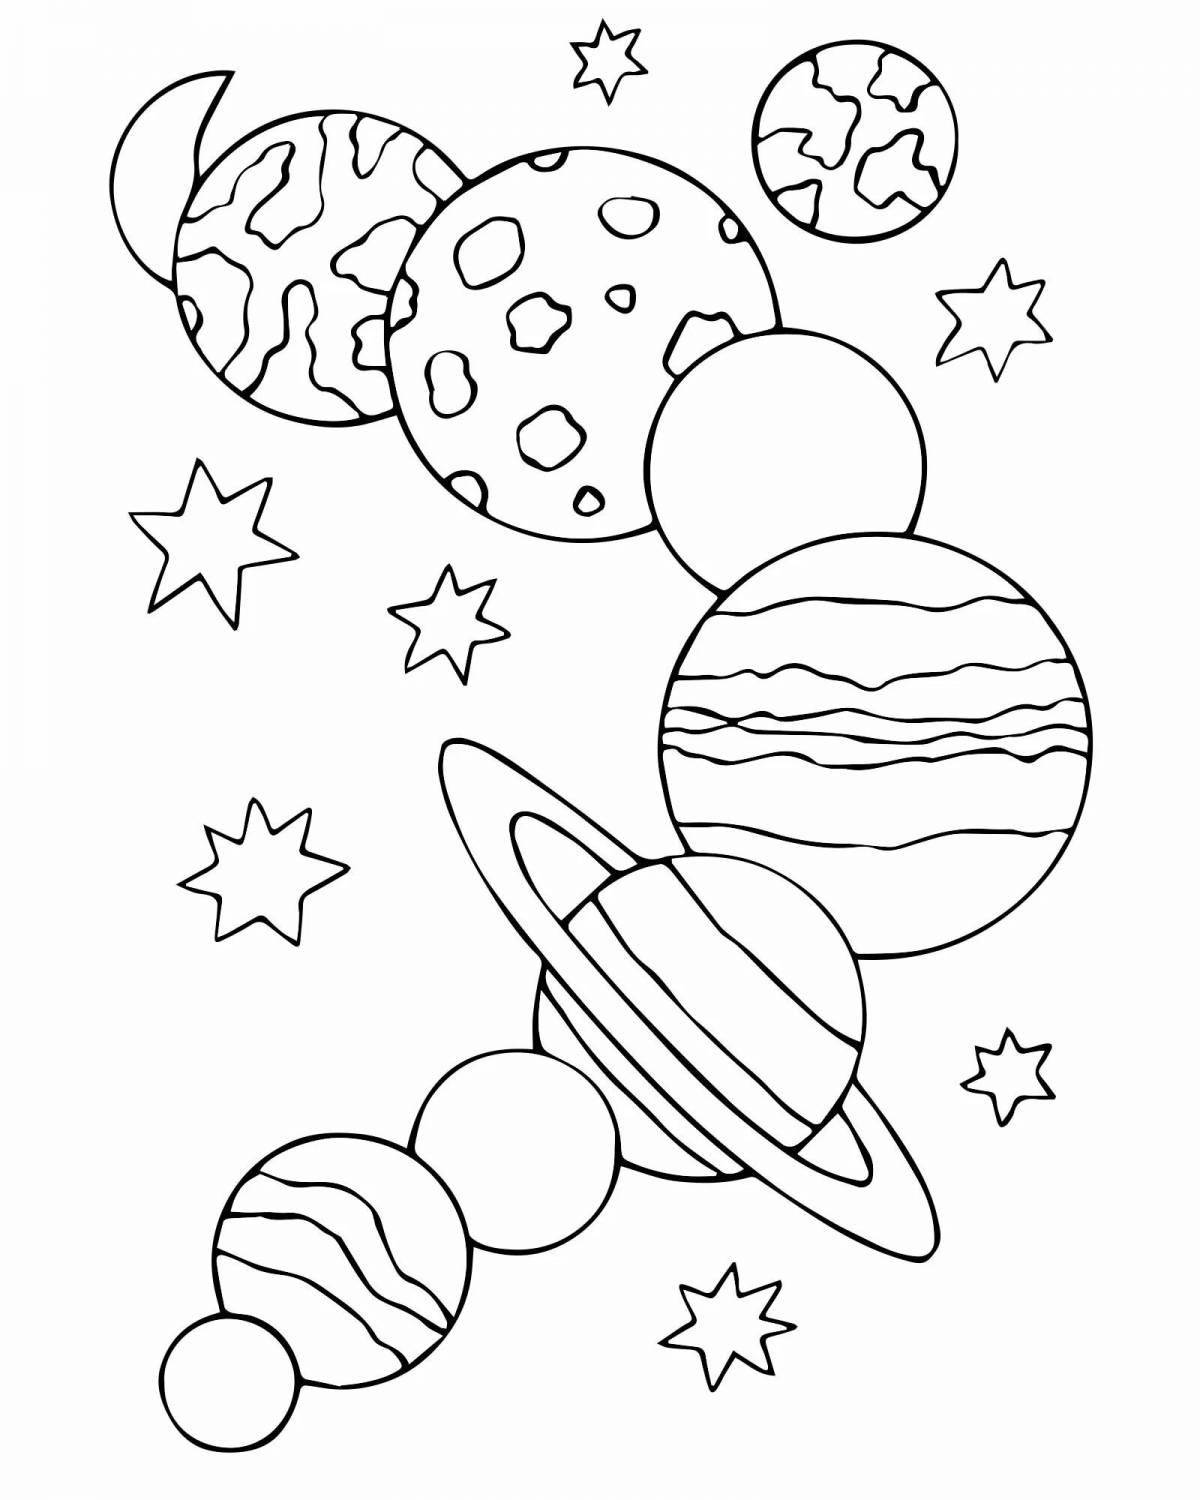 Exciting space coloring book for 4-5 year olds